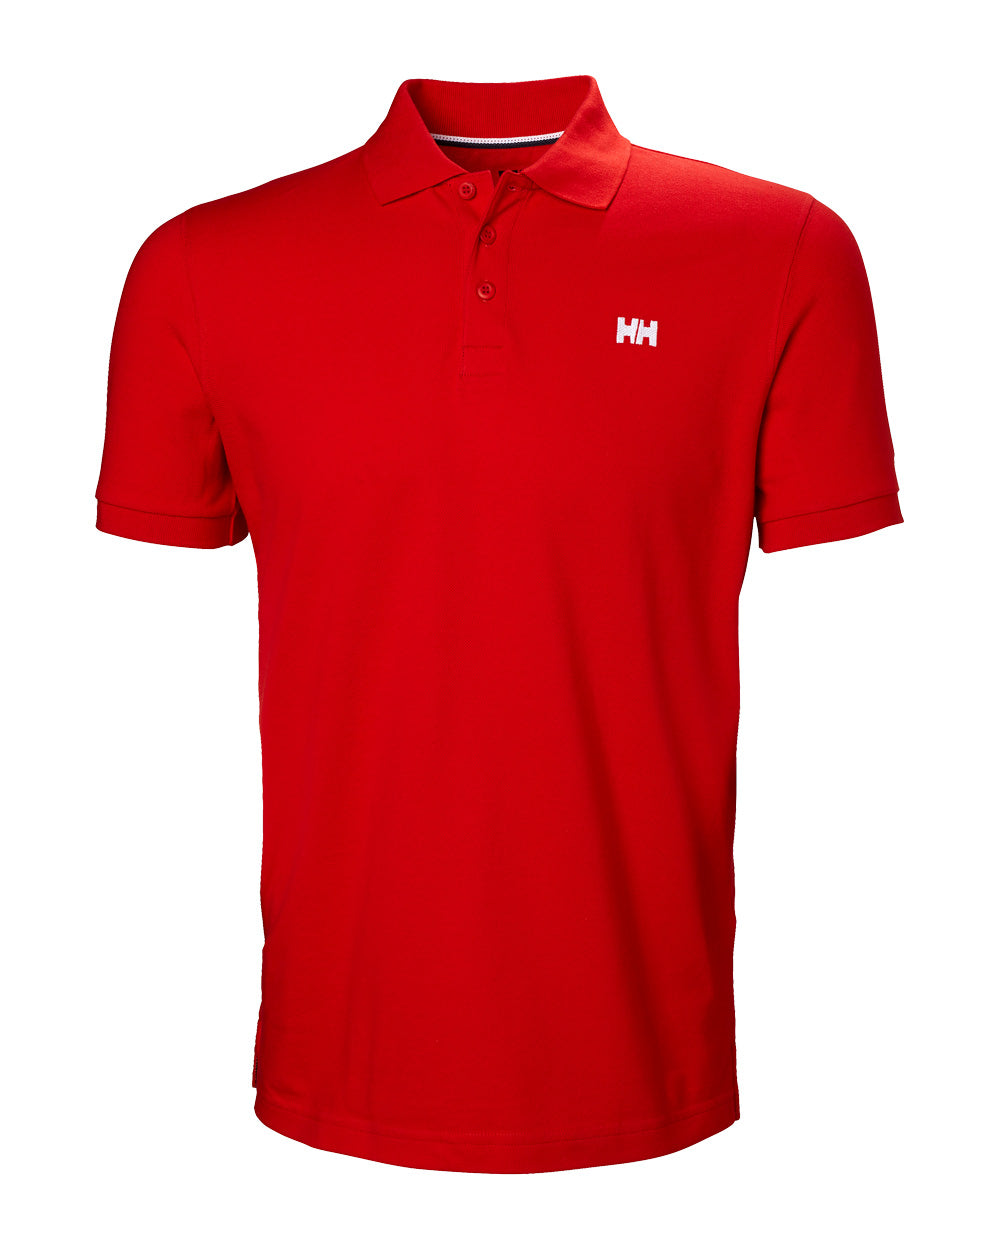 Alert Red coloured Helly Hansen Polo Shirt on White background 